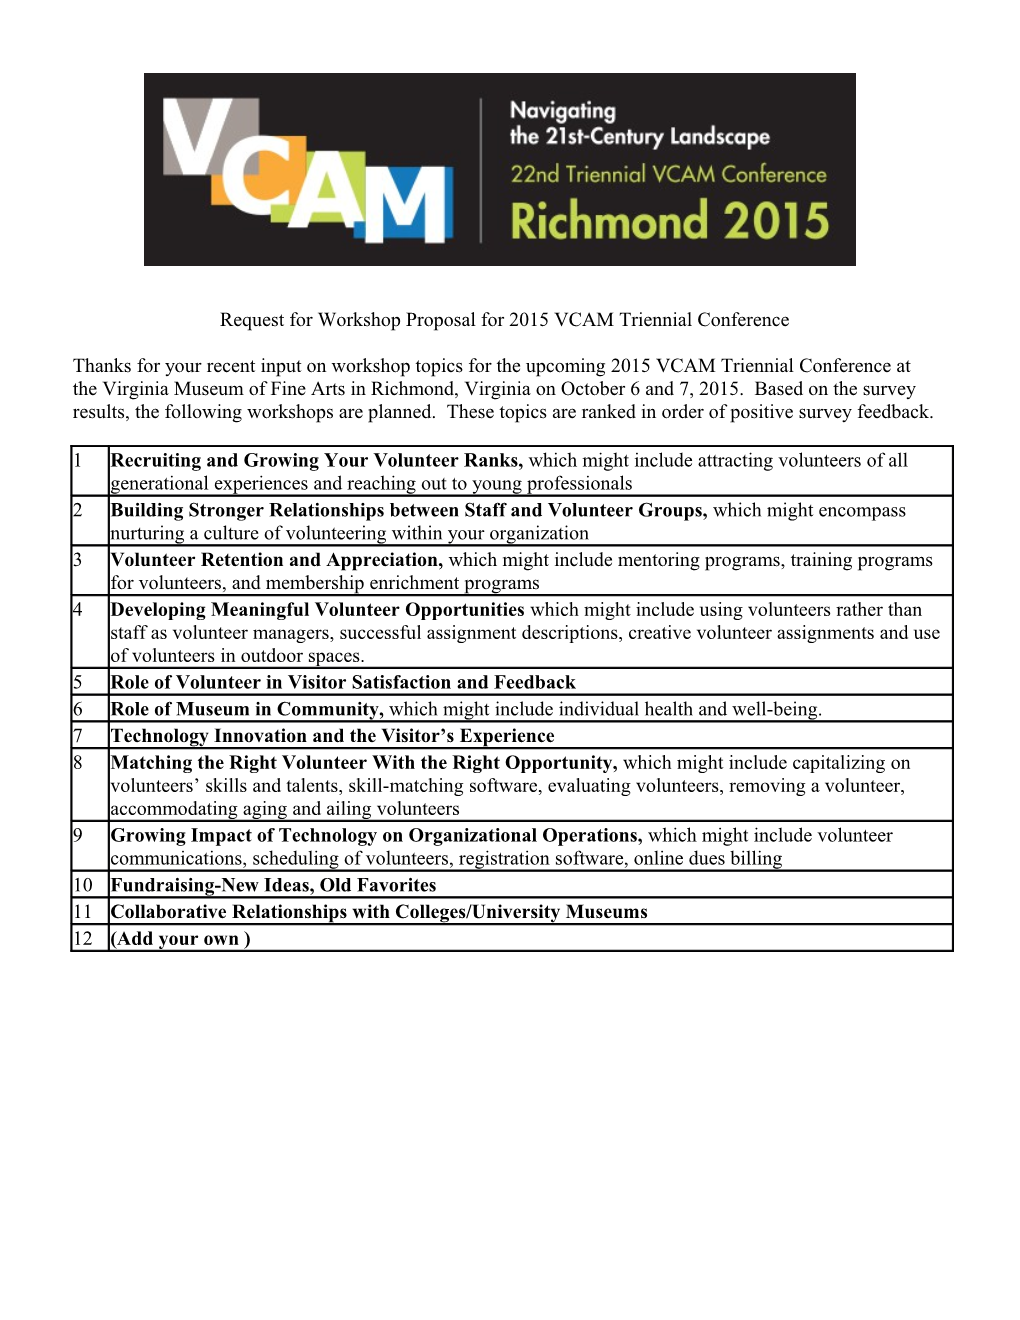 Request for Workshop Proposal for 2015 VCAM Triennial Conference